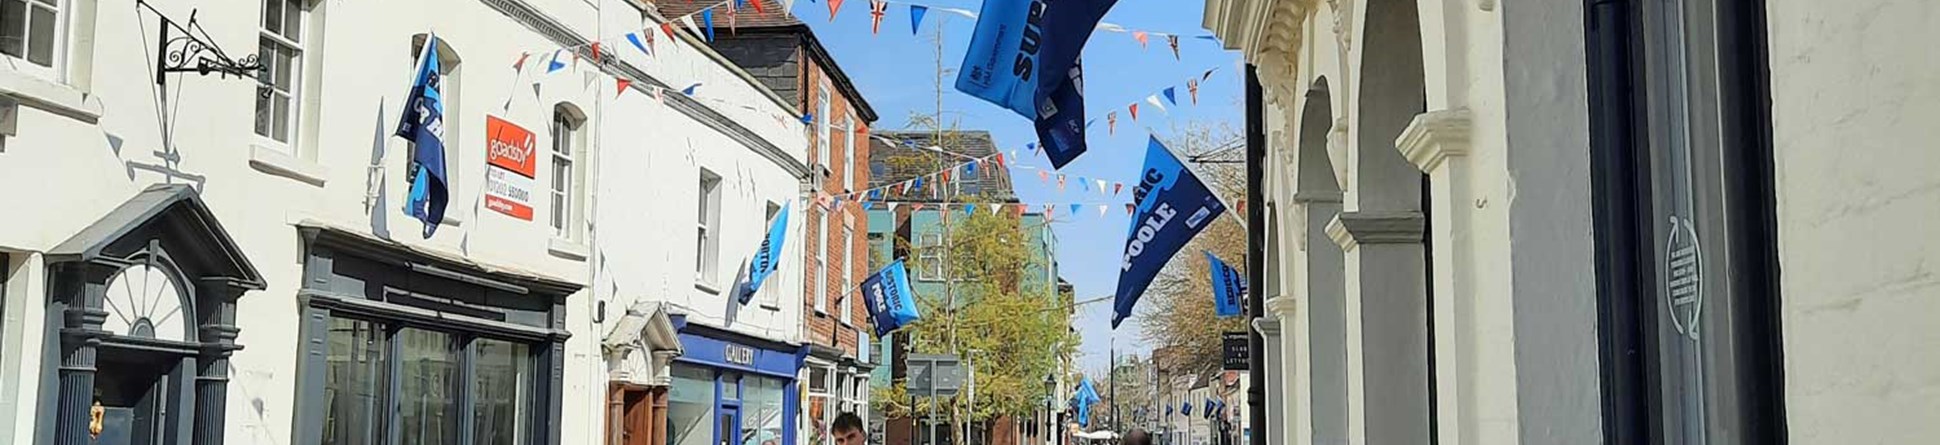 A man walking in a high street lined with historic shops. There is coloured bunting strung across the street.